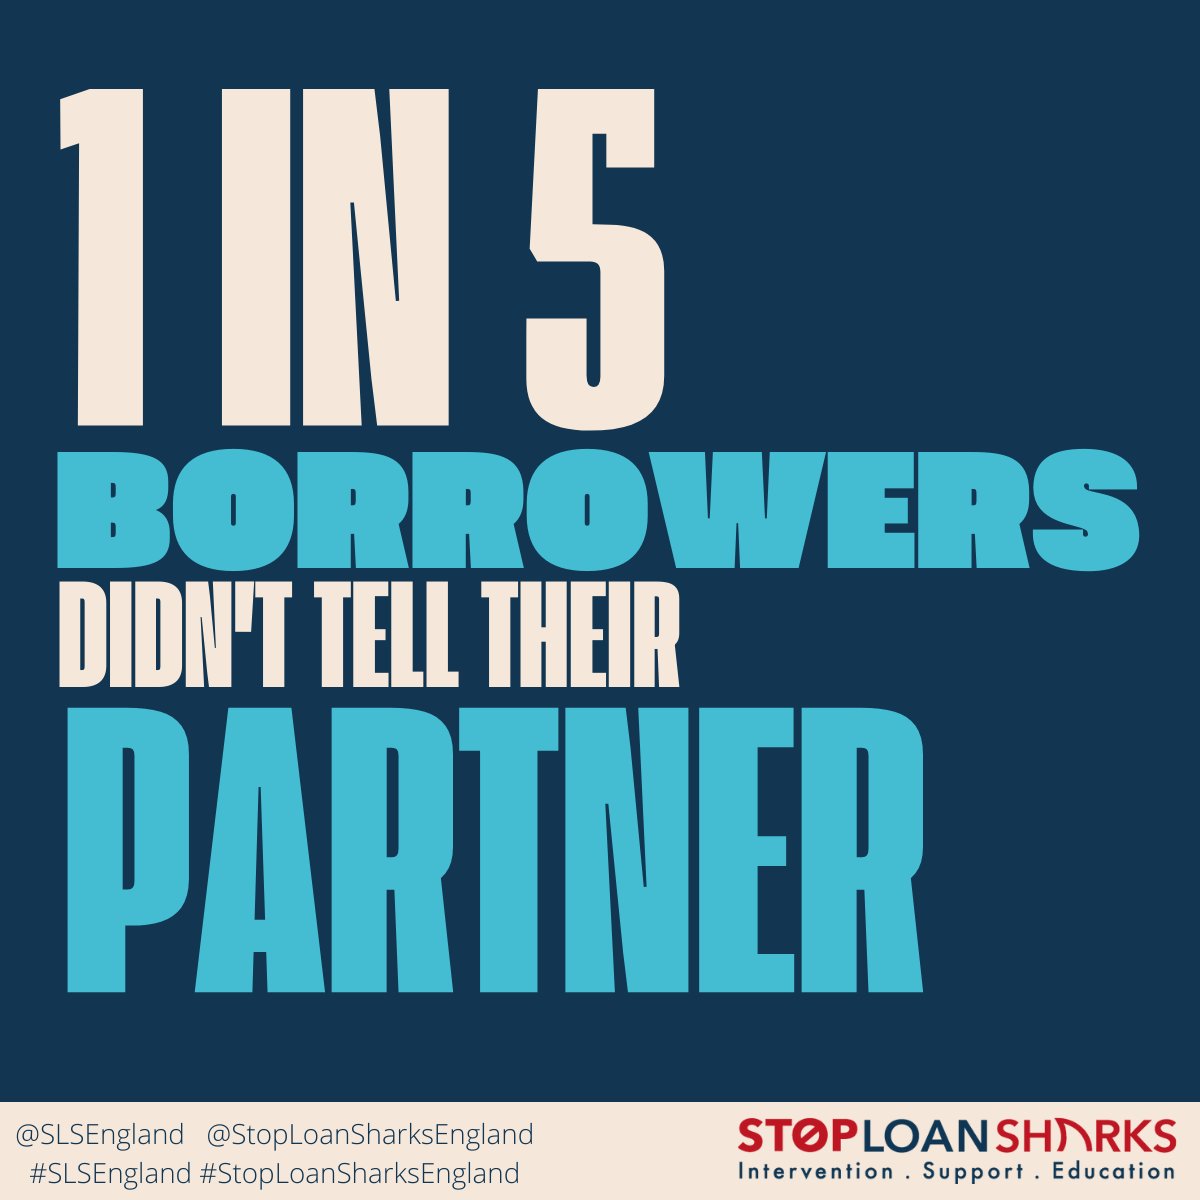 It can be hard to see when u're in a bad situation, don't let the people around you become part of this statistic. If u think u or someone u know is involved with a loan shark contact us on 0300 555 2222 or visit stoploansharks.co.uk #SLSEngland #StopLoanSharksEngland